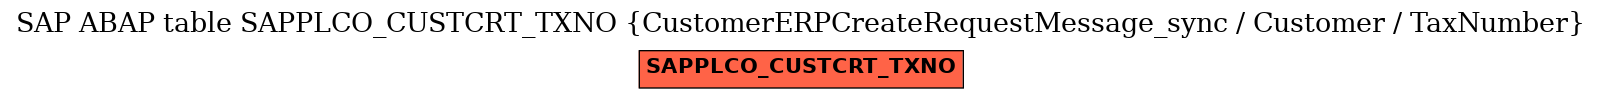 E-R Diagram for table SAPPLCO_CUSTCRT_TXNO (CustomerERPCreateRequestMessage_sync / Customer / TaxNumber)